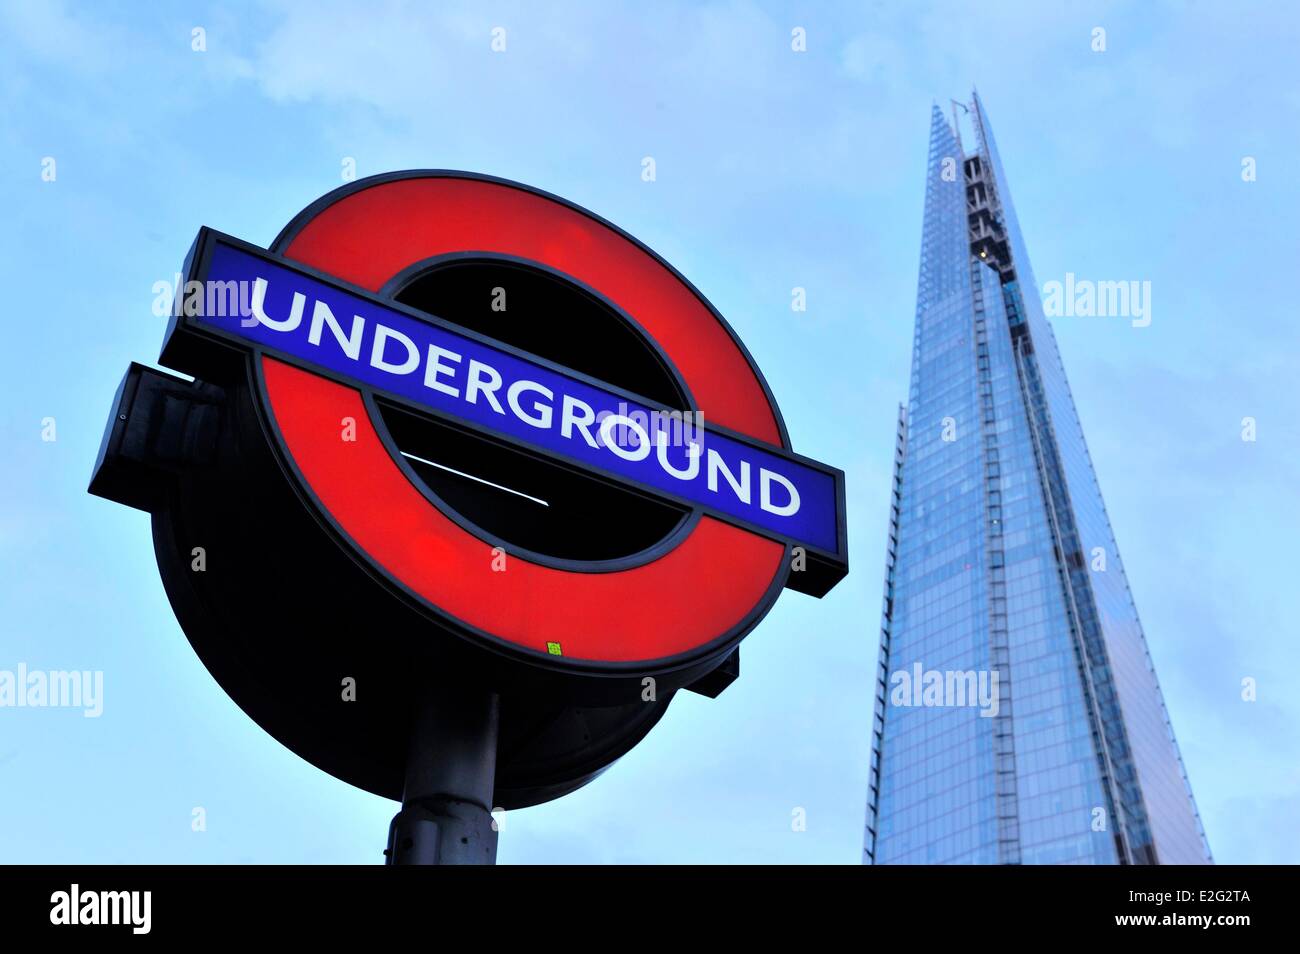 United Kingdom London Southwark underground sign and the Shard London Bridge Tower by architect Renzo Piano the tallest tower Stock Photo